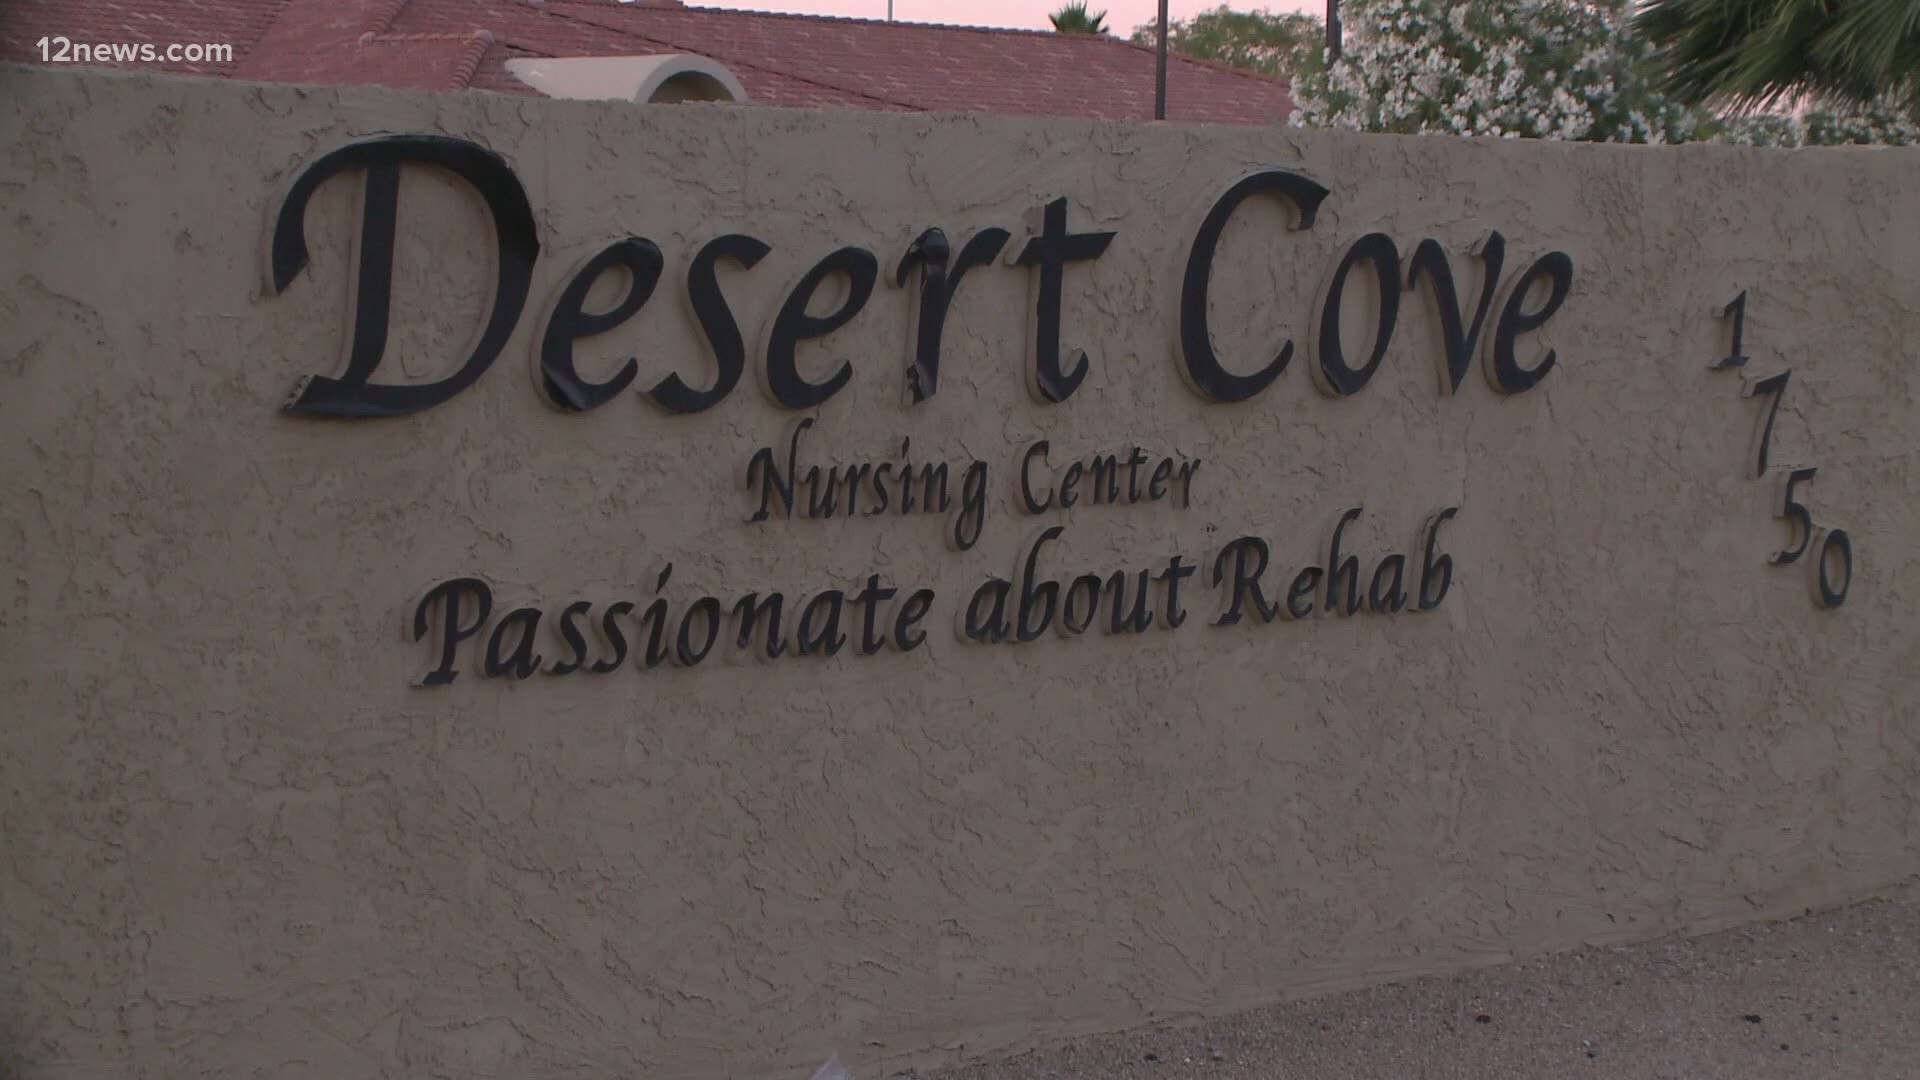 According to data from the Maricopa County Department of Public Health, more than 100 people in Maricopa County nursing facilities have died due to the virus.